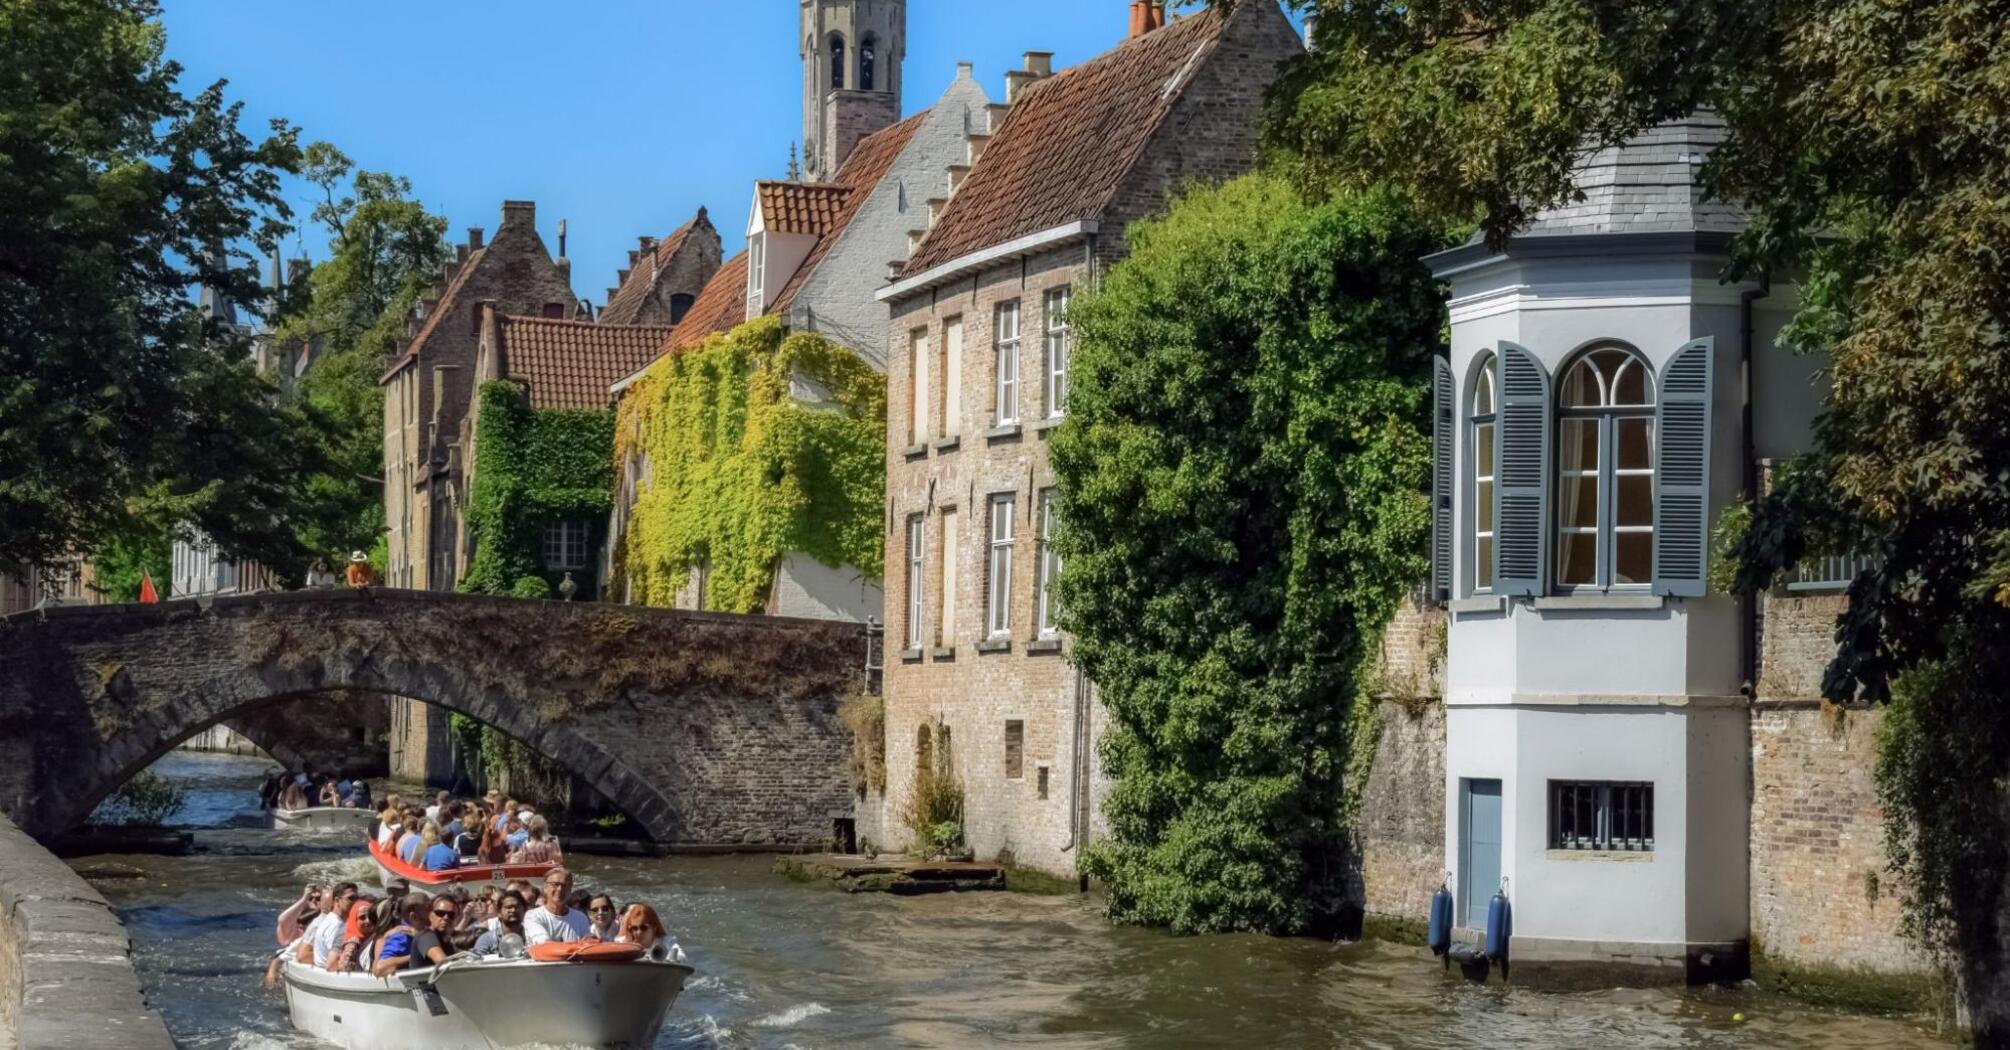 A boat with tourists floats past picturesque houses